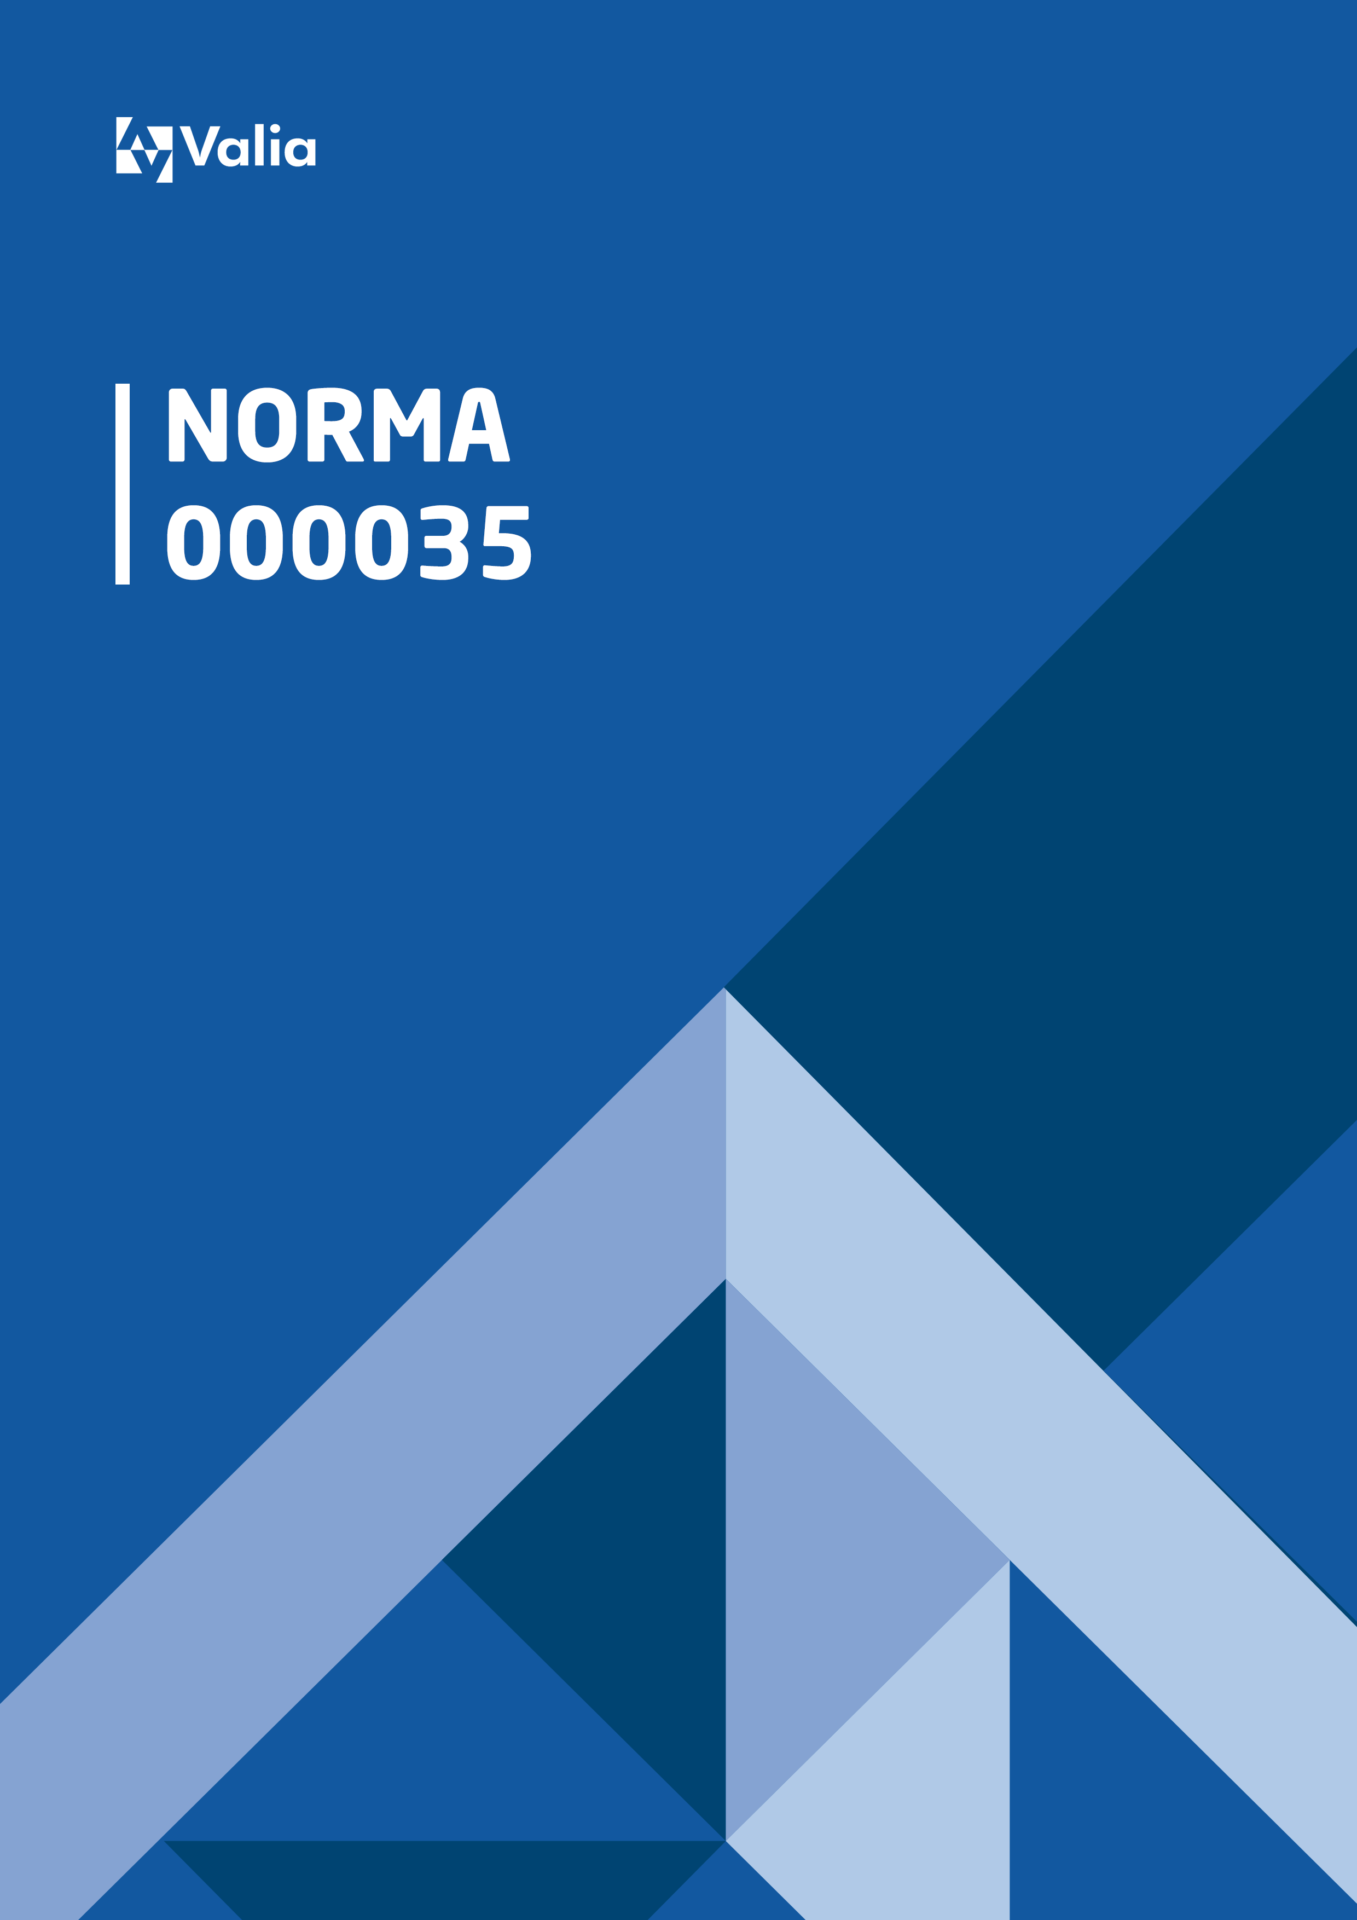 NORMA 000035